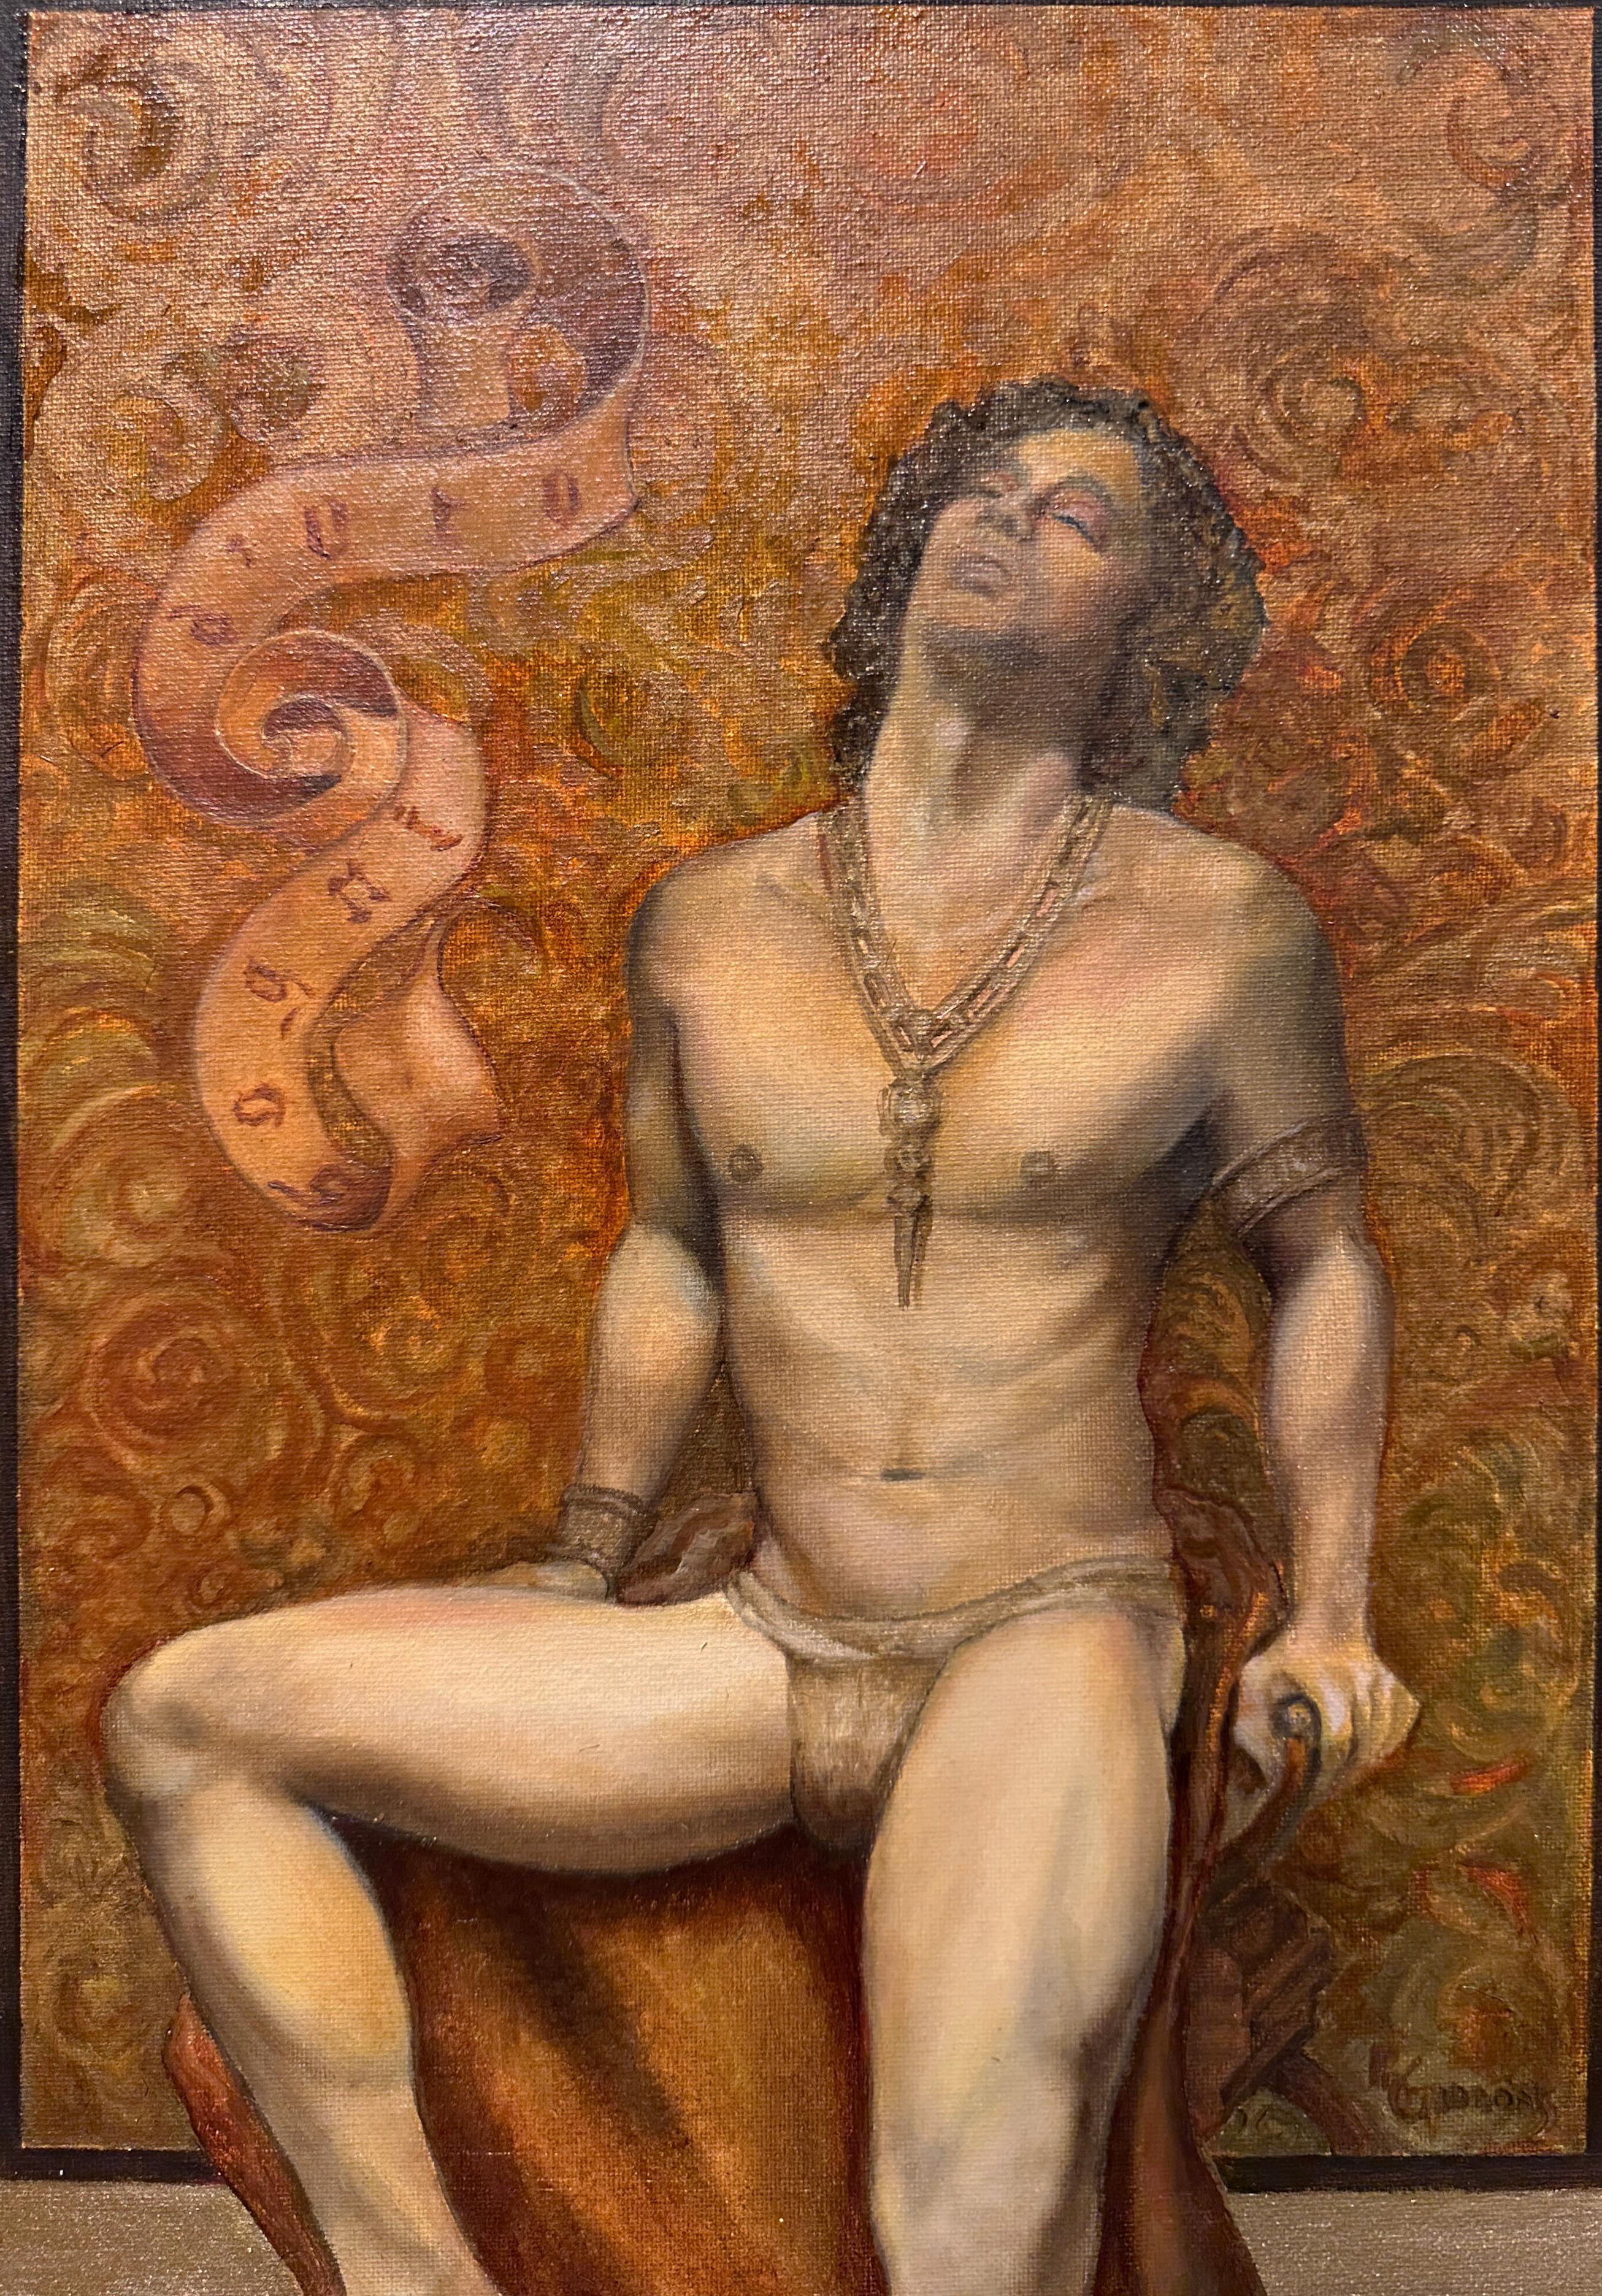 Sogno D'Oro - Seated Muscular Male Wearing a Loin Cloth, Original Oil on Canvas - Contemporary Painting by Richard Gibbons